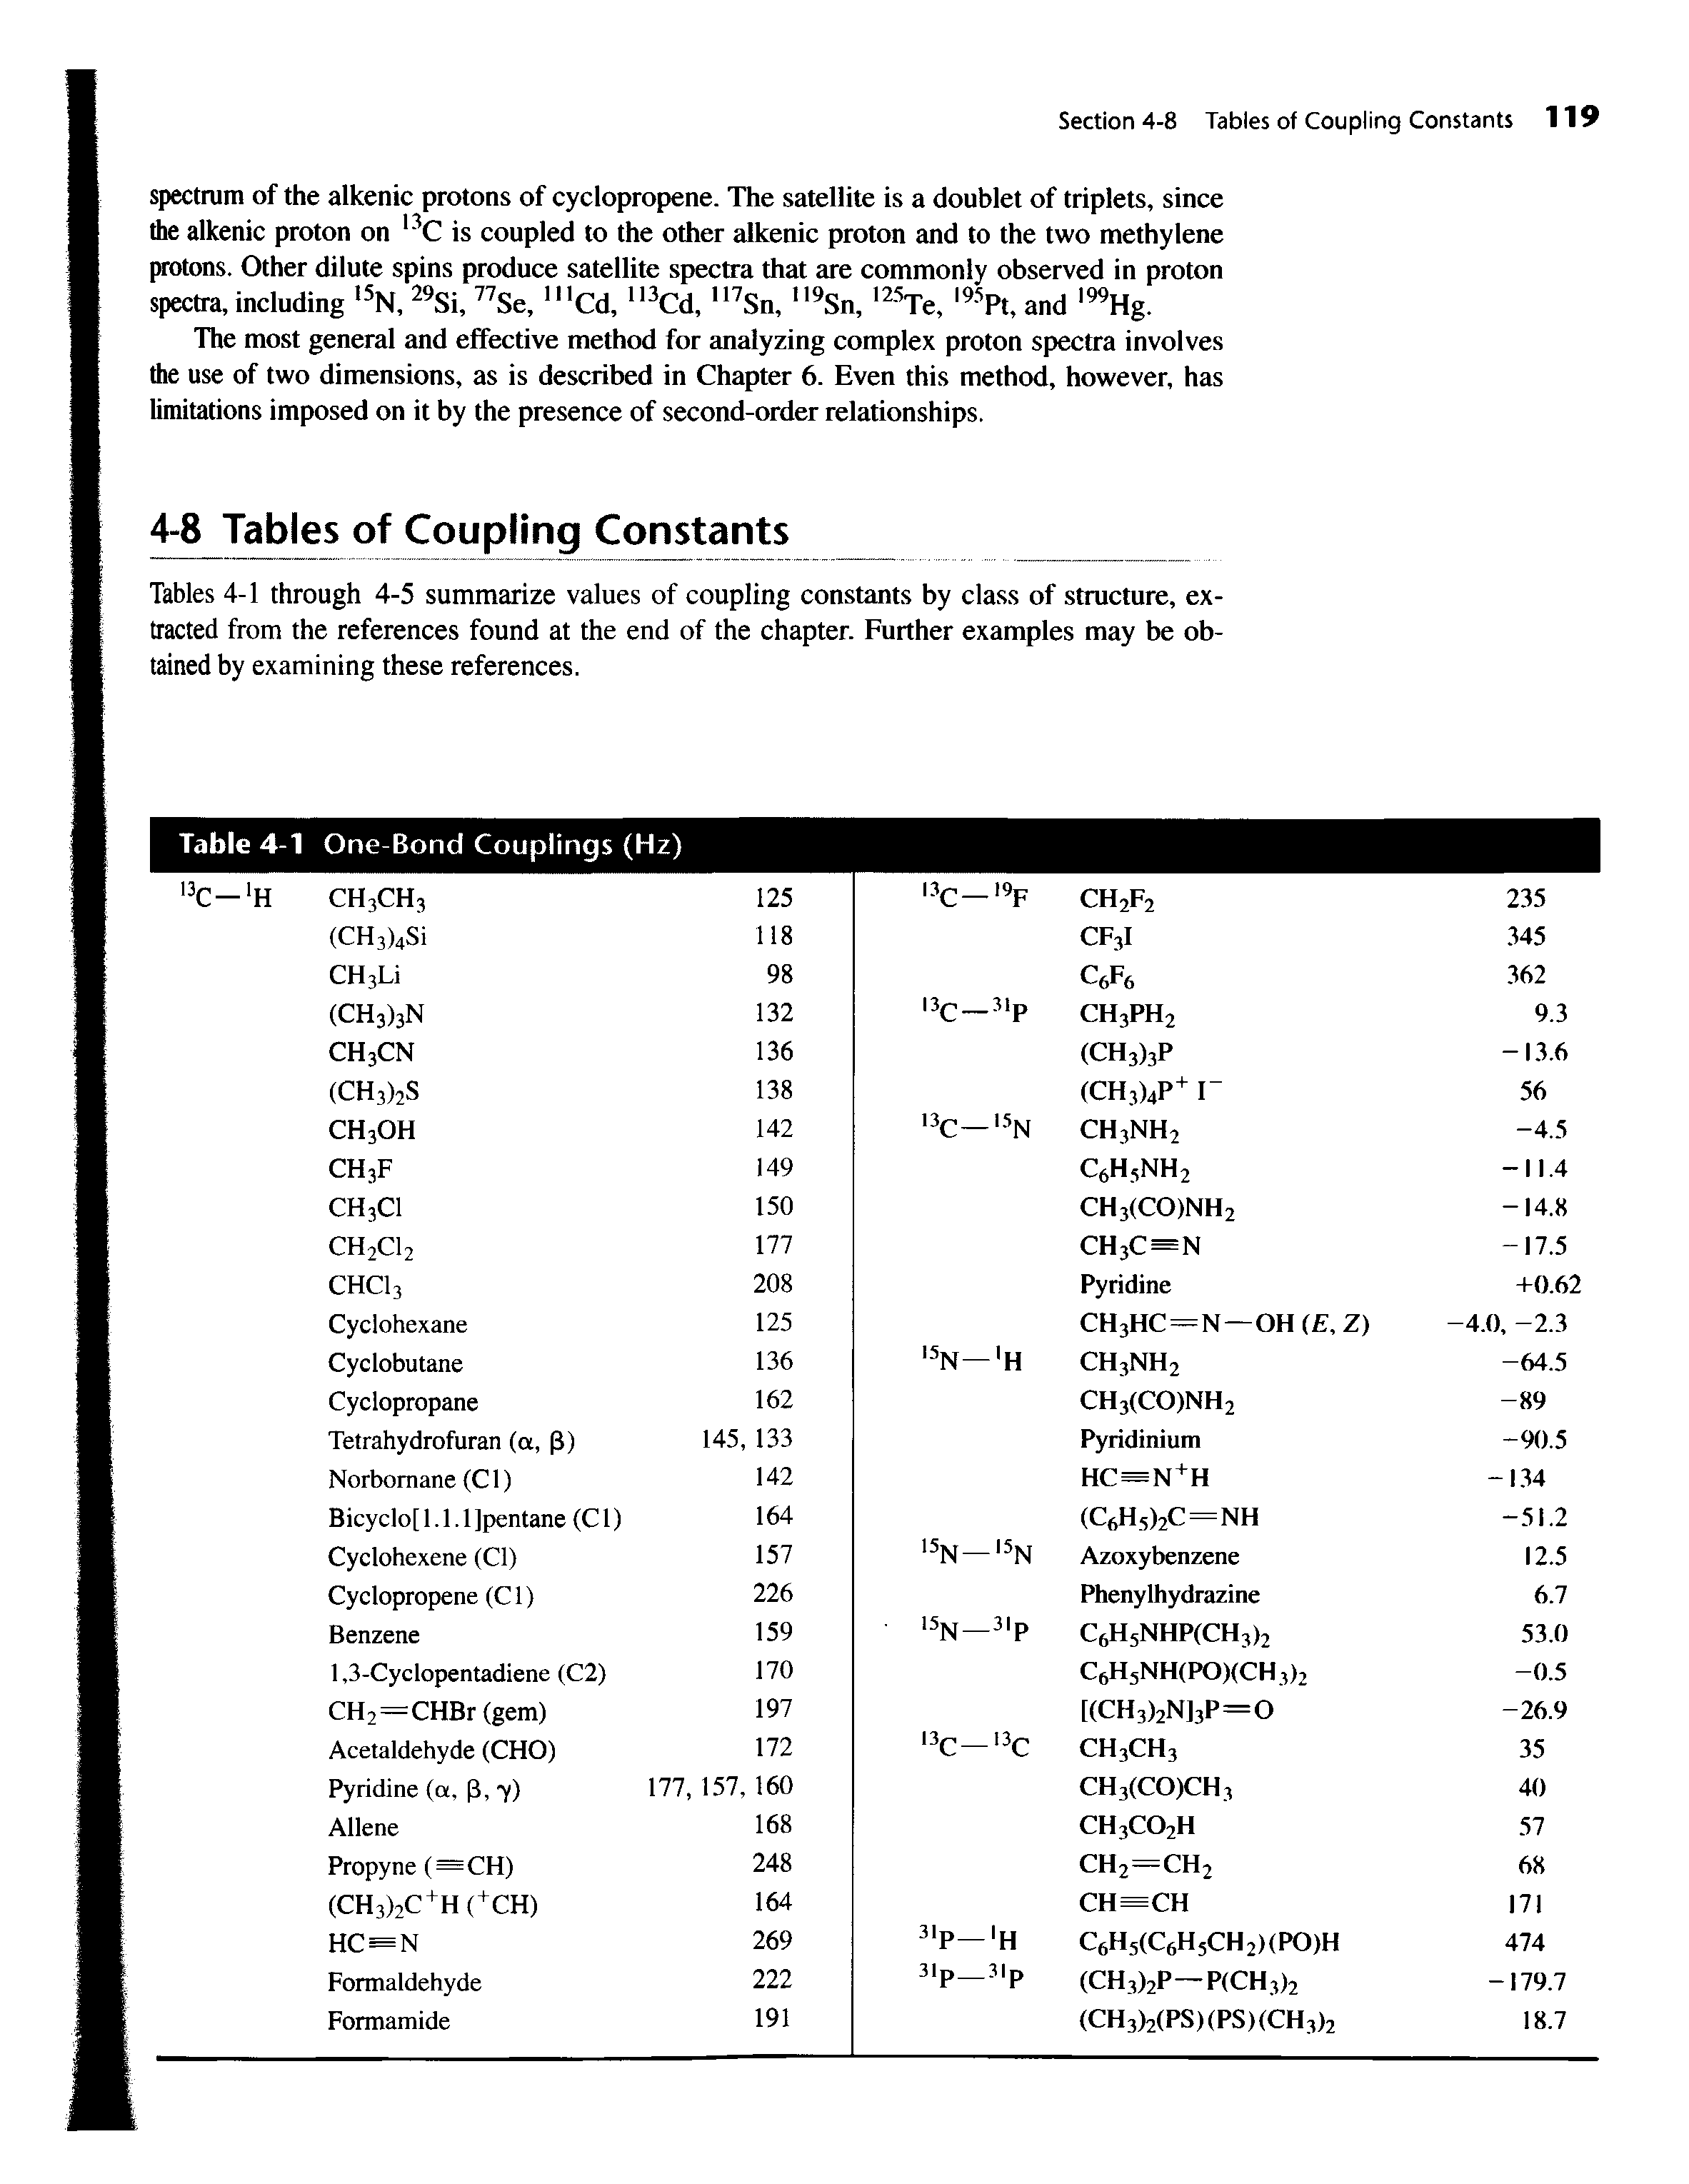 Tables 4-1 through 4-5 summarize values of coupling constants by class of structure, extracted from the references found at the end of the chapter. Further examples may be obtained by examining these references.